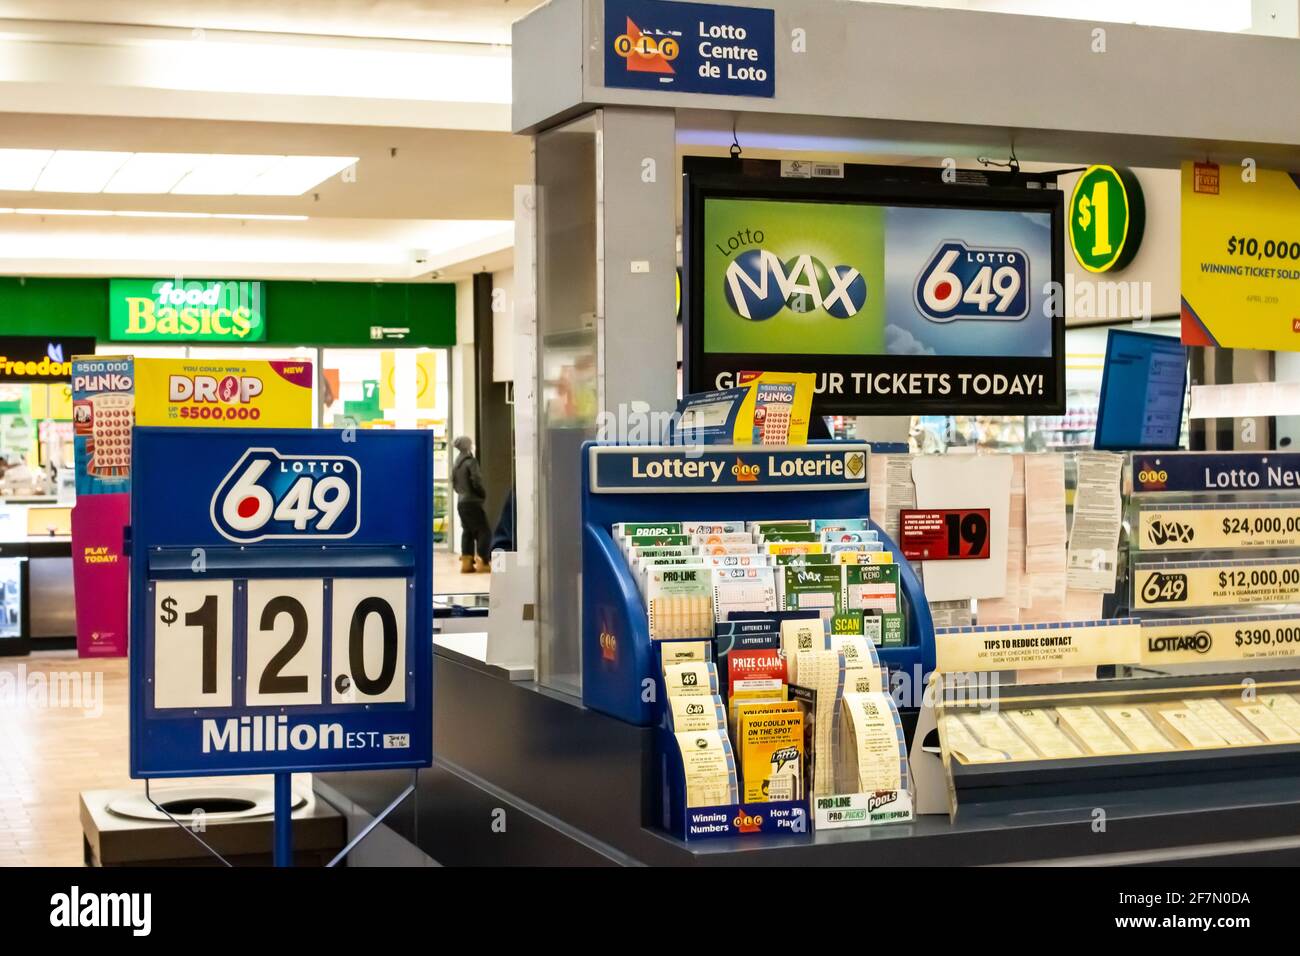 London, Ontario, Canada - February 26 2021: A lotto 649 ticket booth in Sherwood Forest Mall states that the jackpot is valued at 12 million dollars. Stock Photo